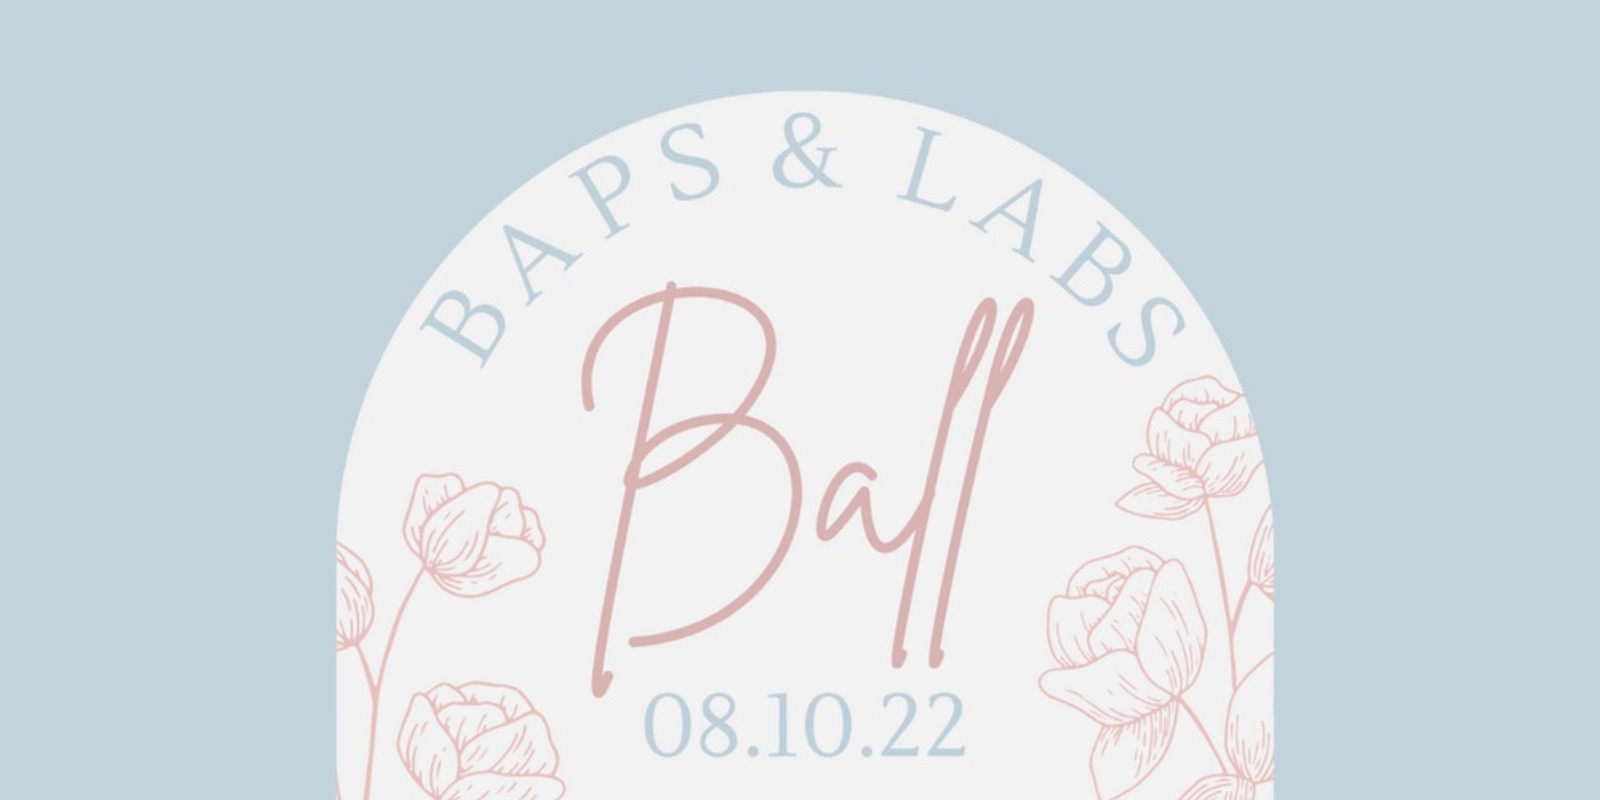 Banner image for BAPS & LABS Annual Ball